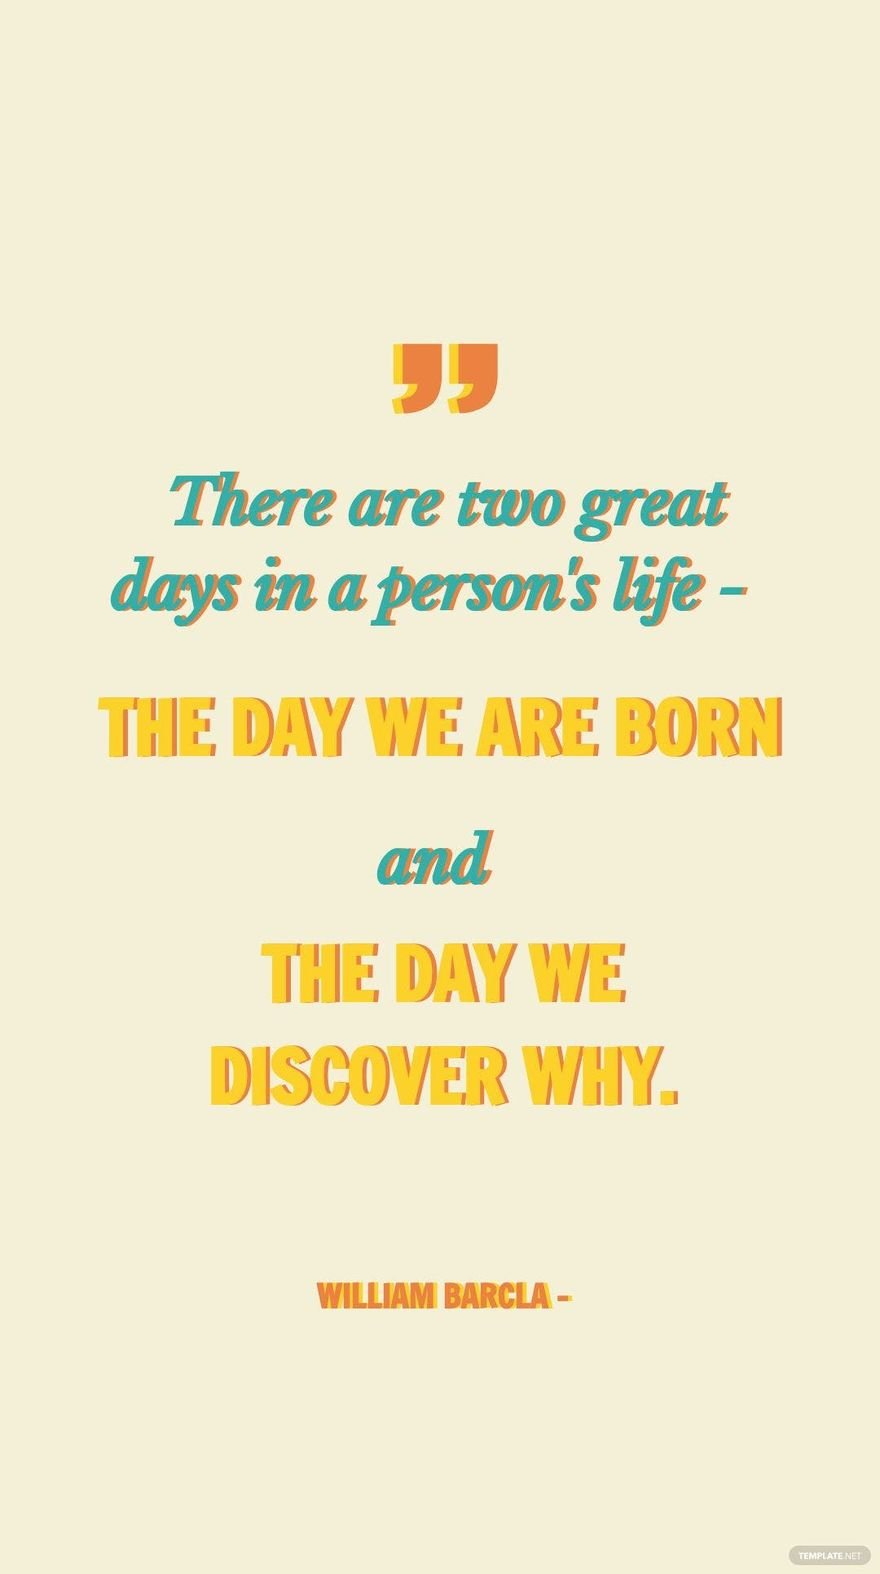 William Barcla - There are two great days in a person's life - the day we are born and the day we discover why.